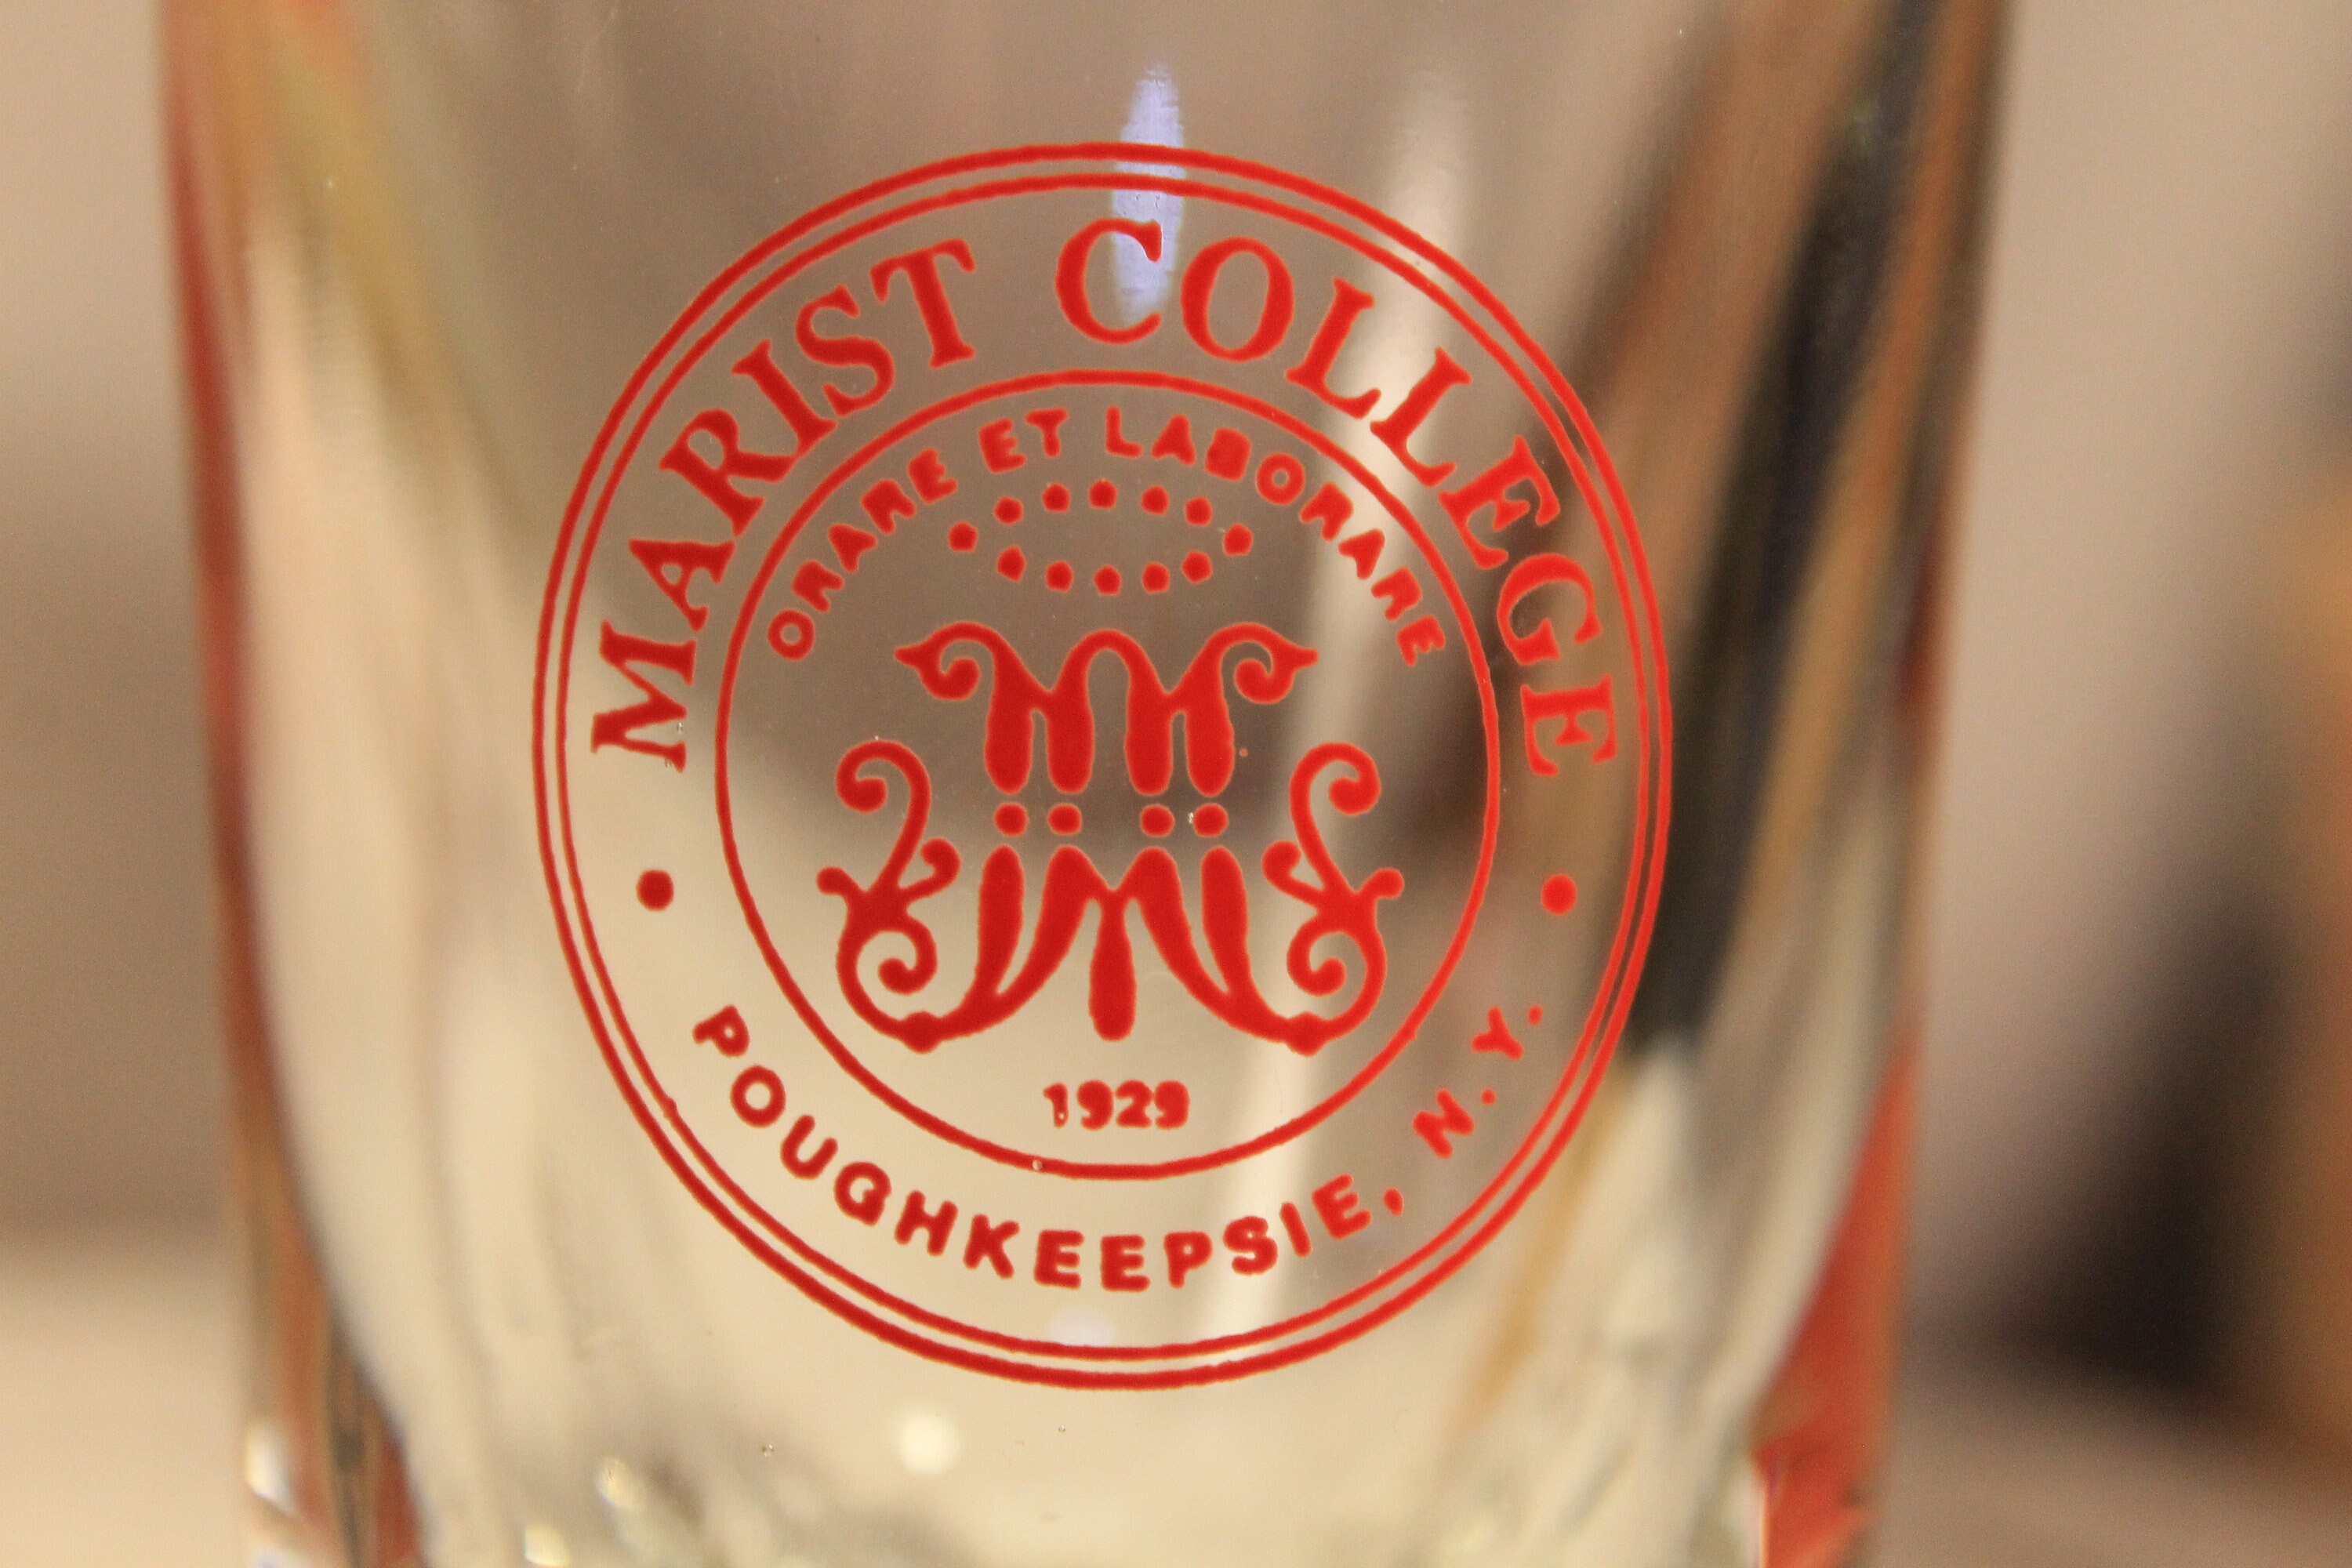 Marist College Cups and Mugs, Marist College Shot Glasses